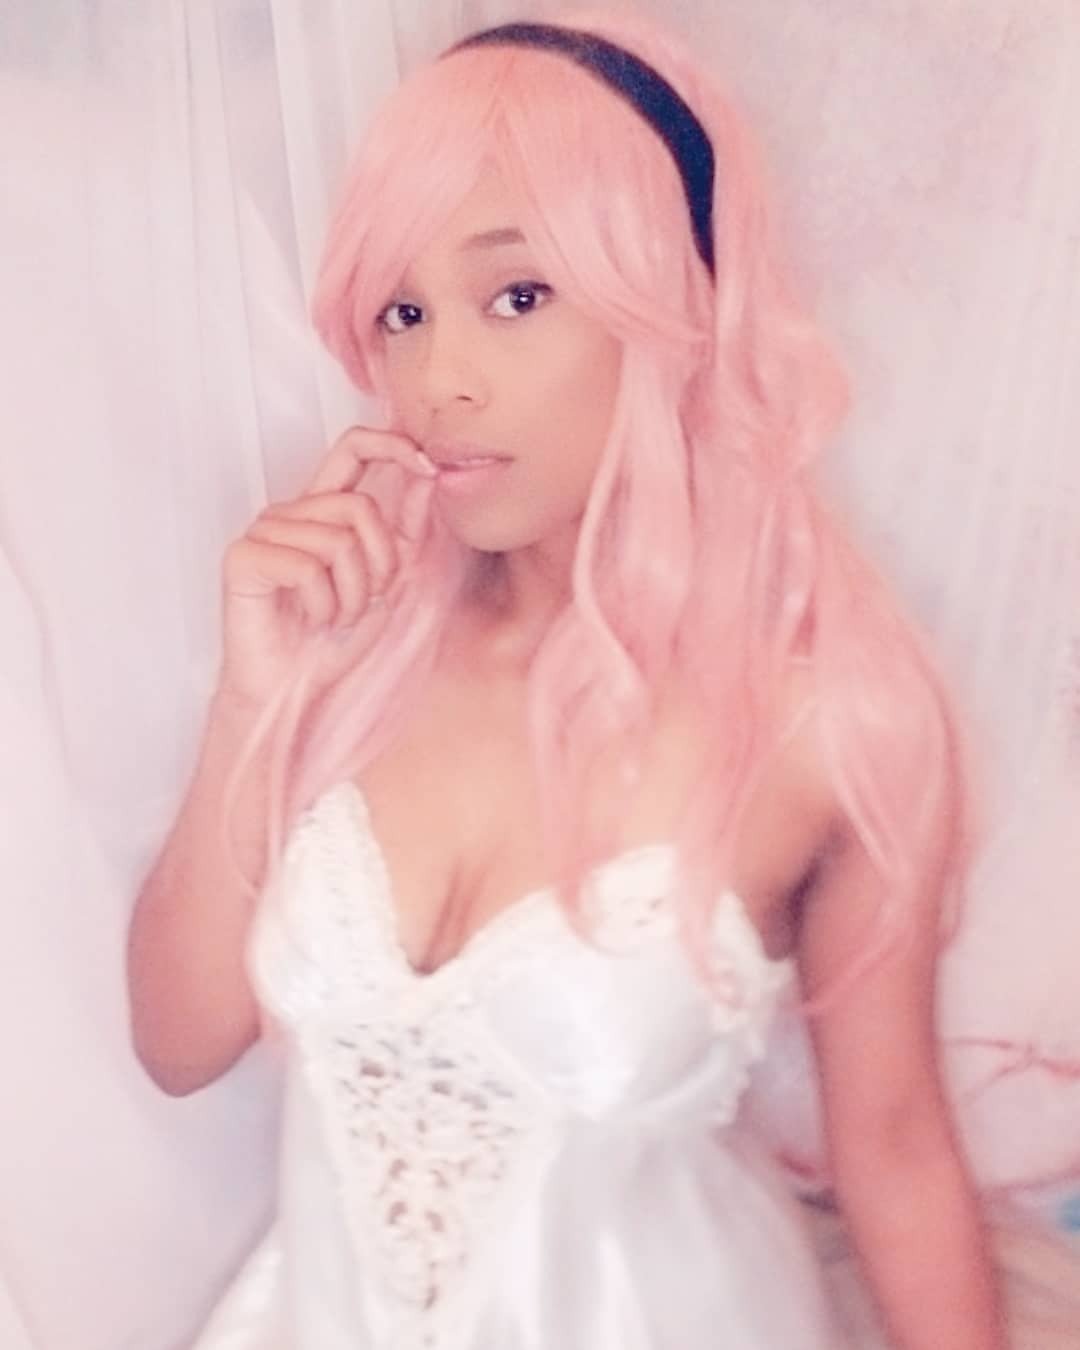 Photo by Yuki Izanami with the username @PrincessYuki, who is a star user,  September 21, 2020 at 9:47 PM and the text says '☁️ Midnight Dreaming ☁️
*
*
*
#blackgirlsarekawaii #pinkaesthetic #fairycore #aesthetic #selfie #photography #ａｅｓｔｈｅｔｉｃ #cosplay #kawaii #pink #vintageclothing #vintage'